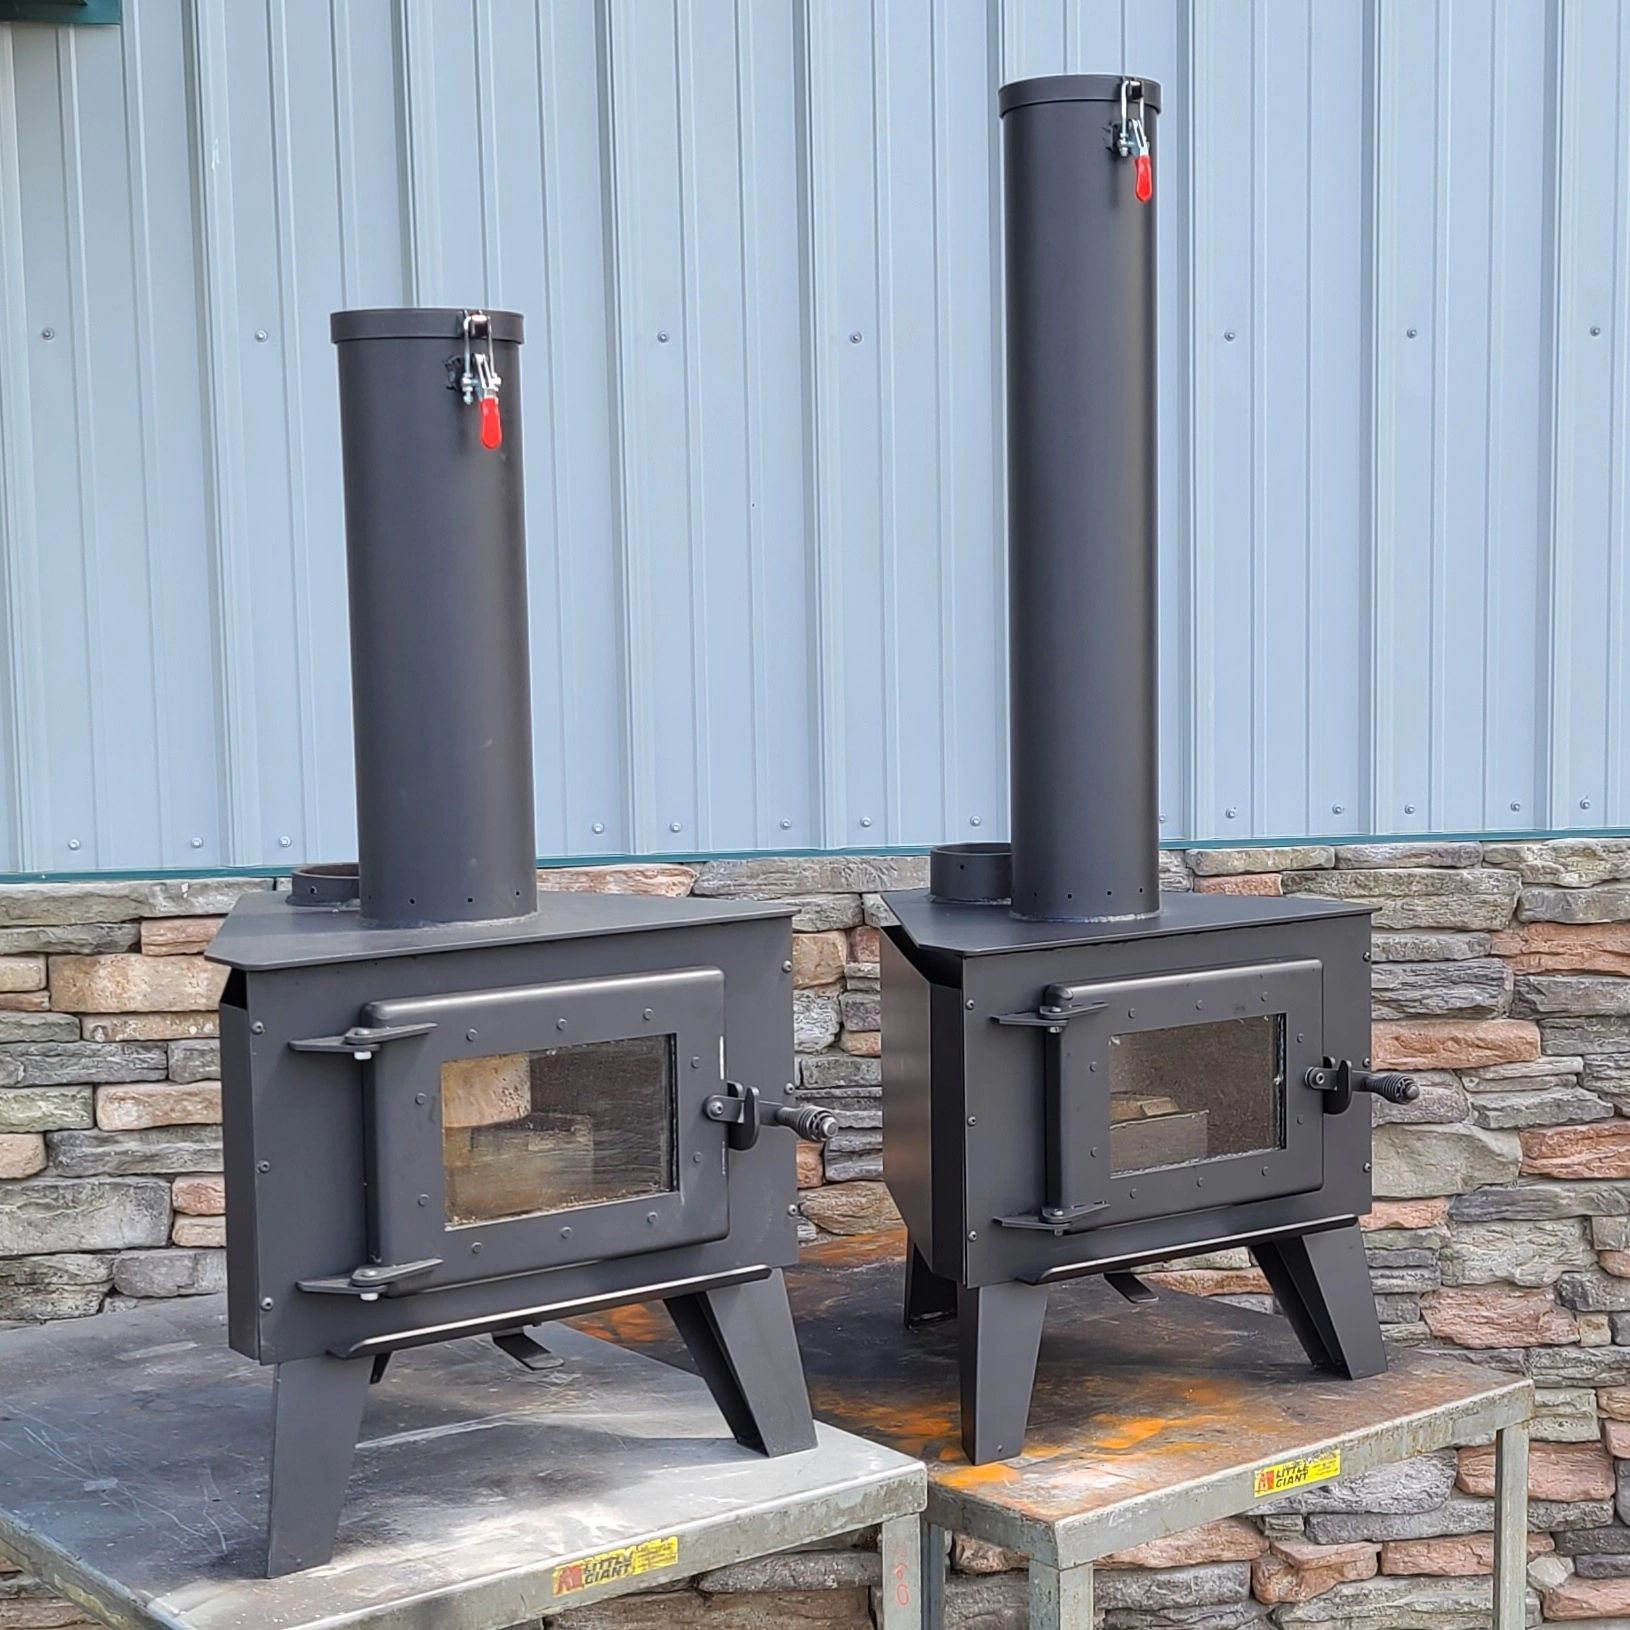 The World's First Gravity Fed Non-Electric Pres-To-Log Tiny Stove